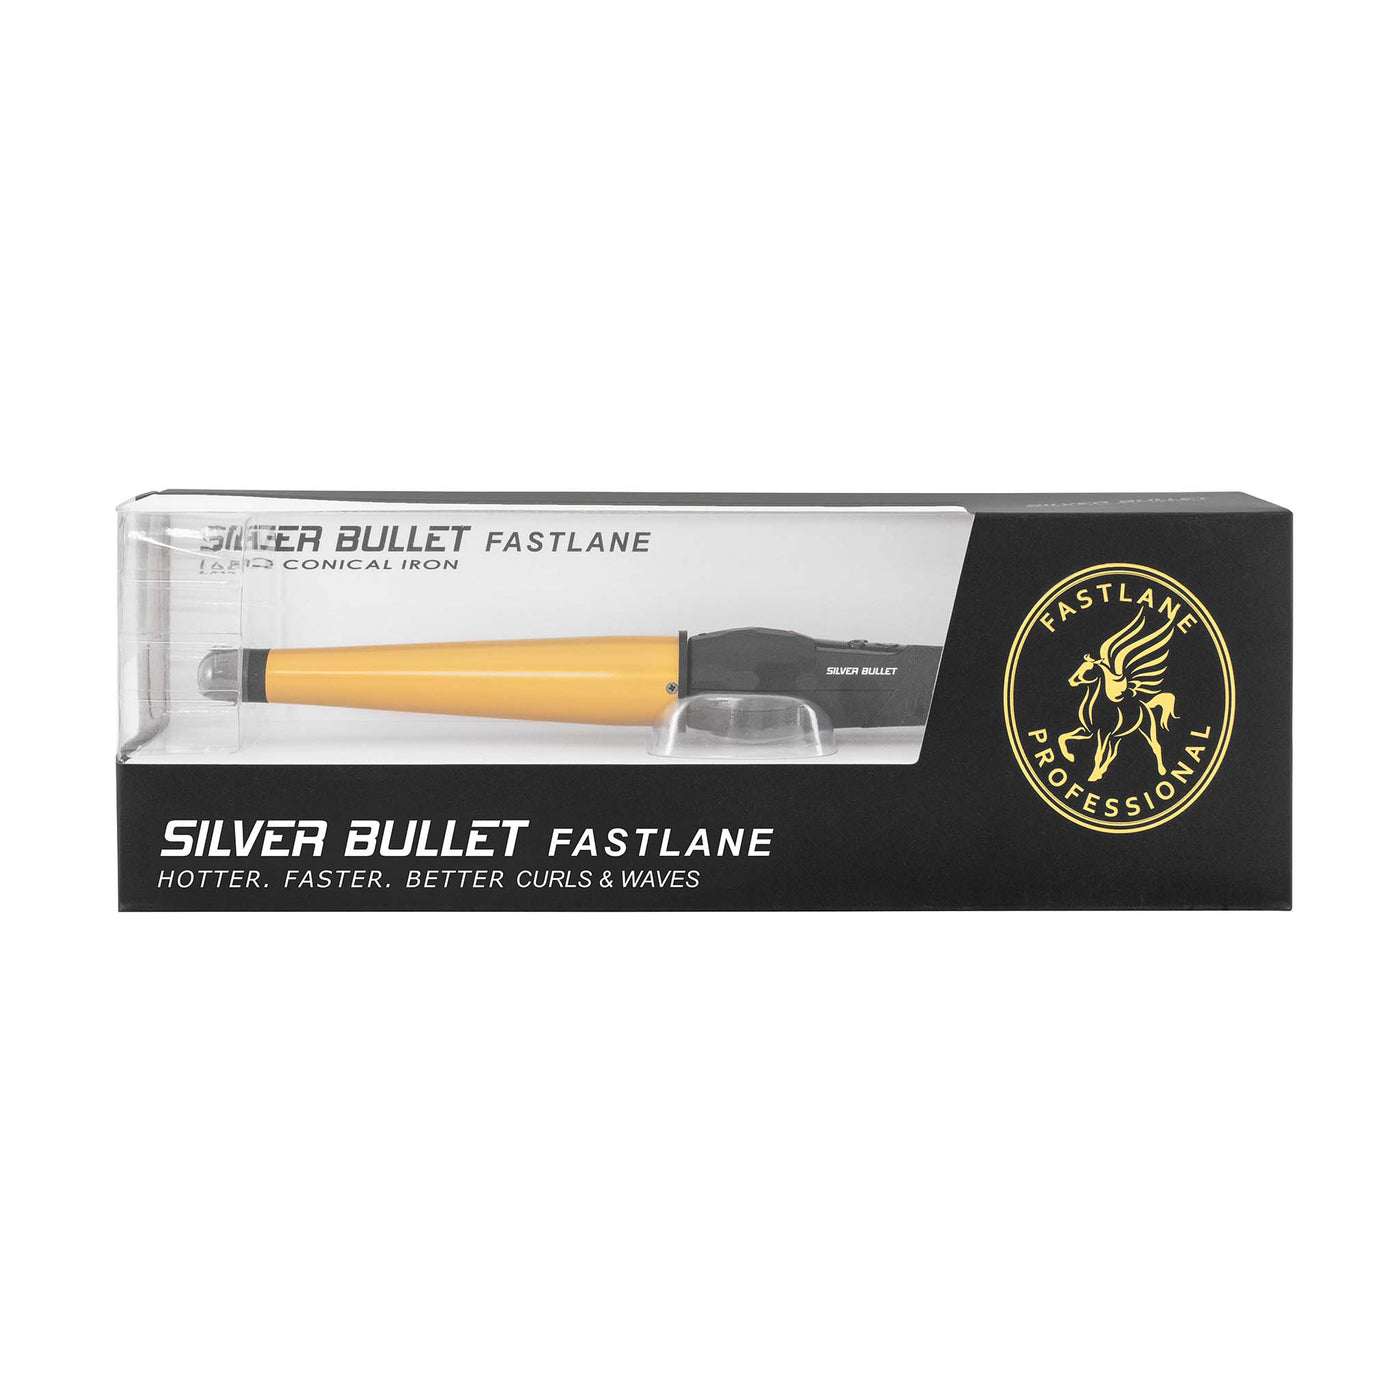 Silver Bullet Fastlane Ceramic Conical Curling Iron Gold